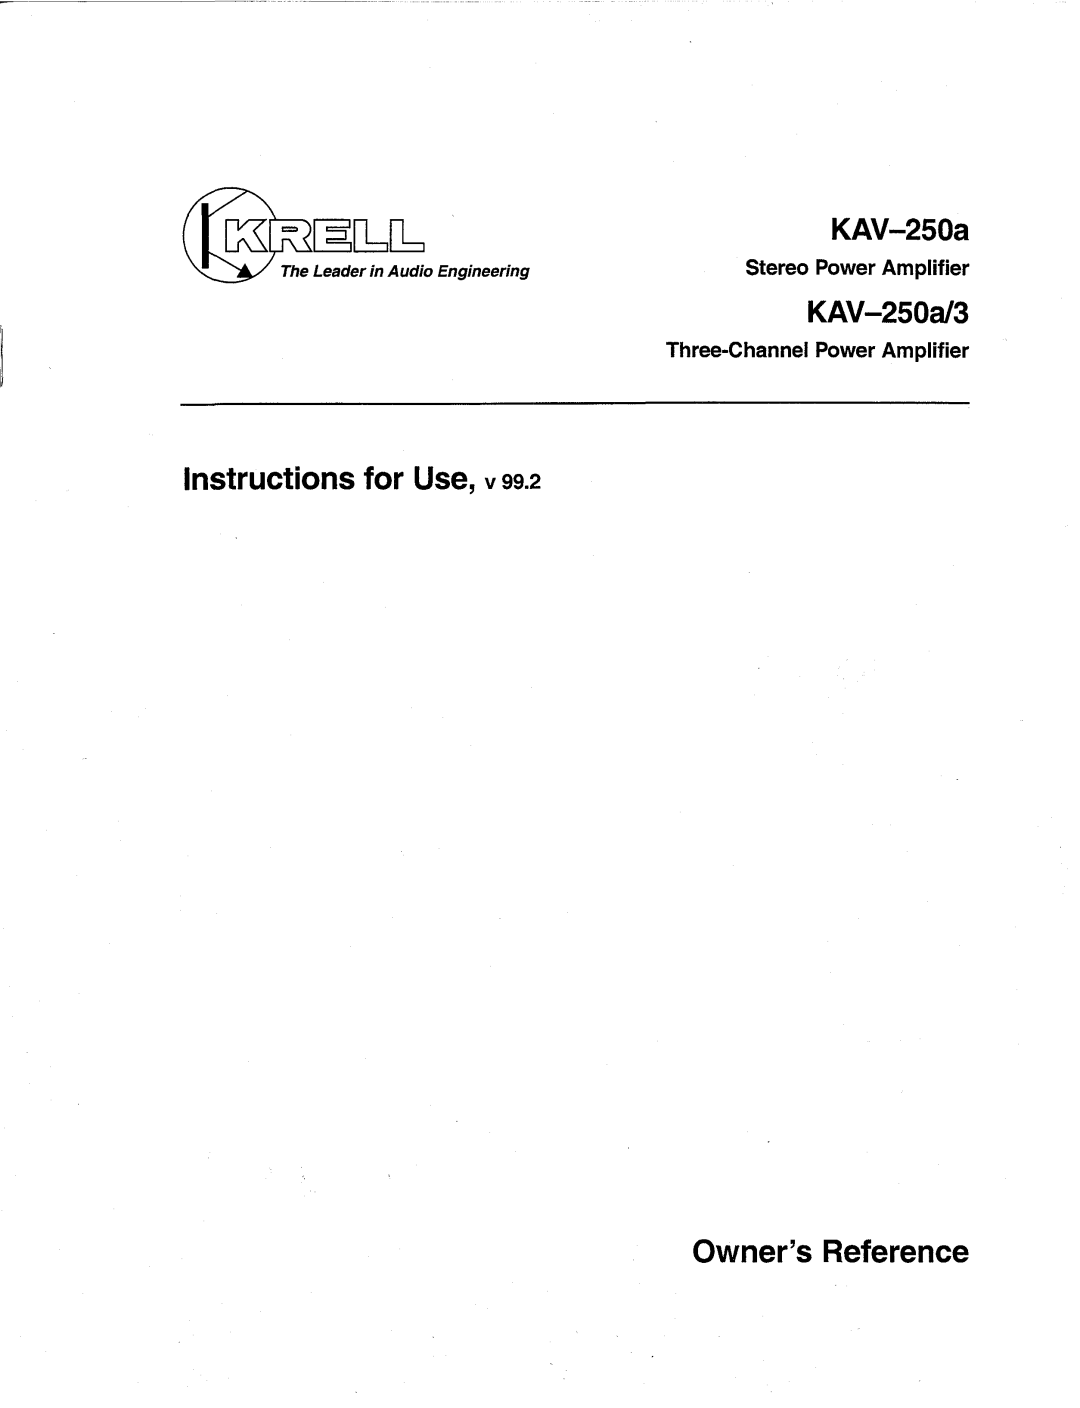 Krell Industries KAV-250a/3 manual Instructionsfor Use,v, Owners Reference, Leader in Audio Engineering 